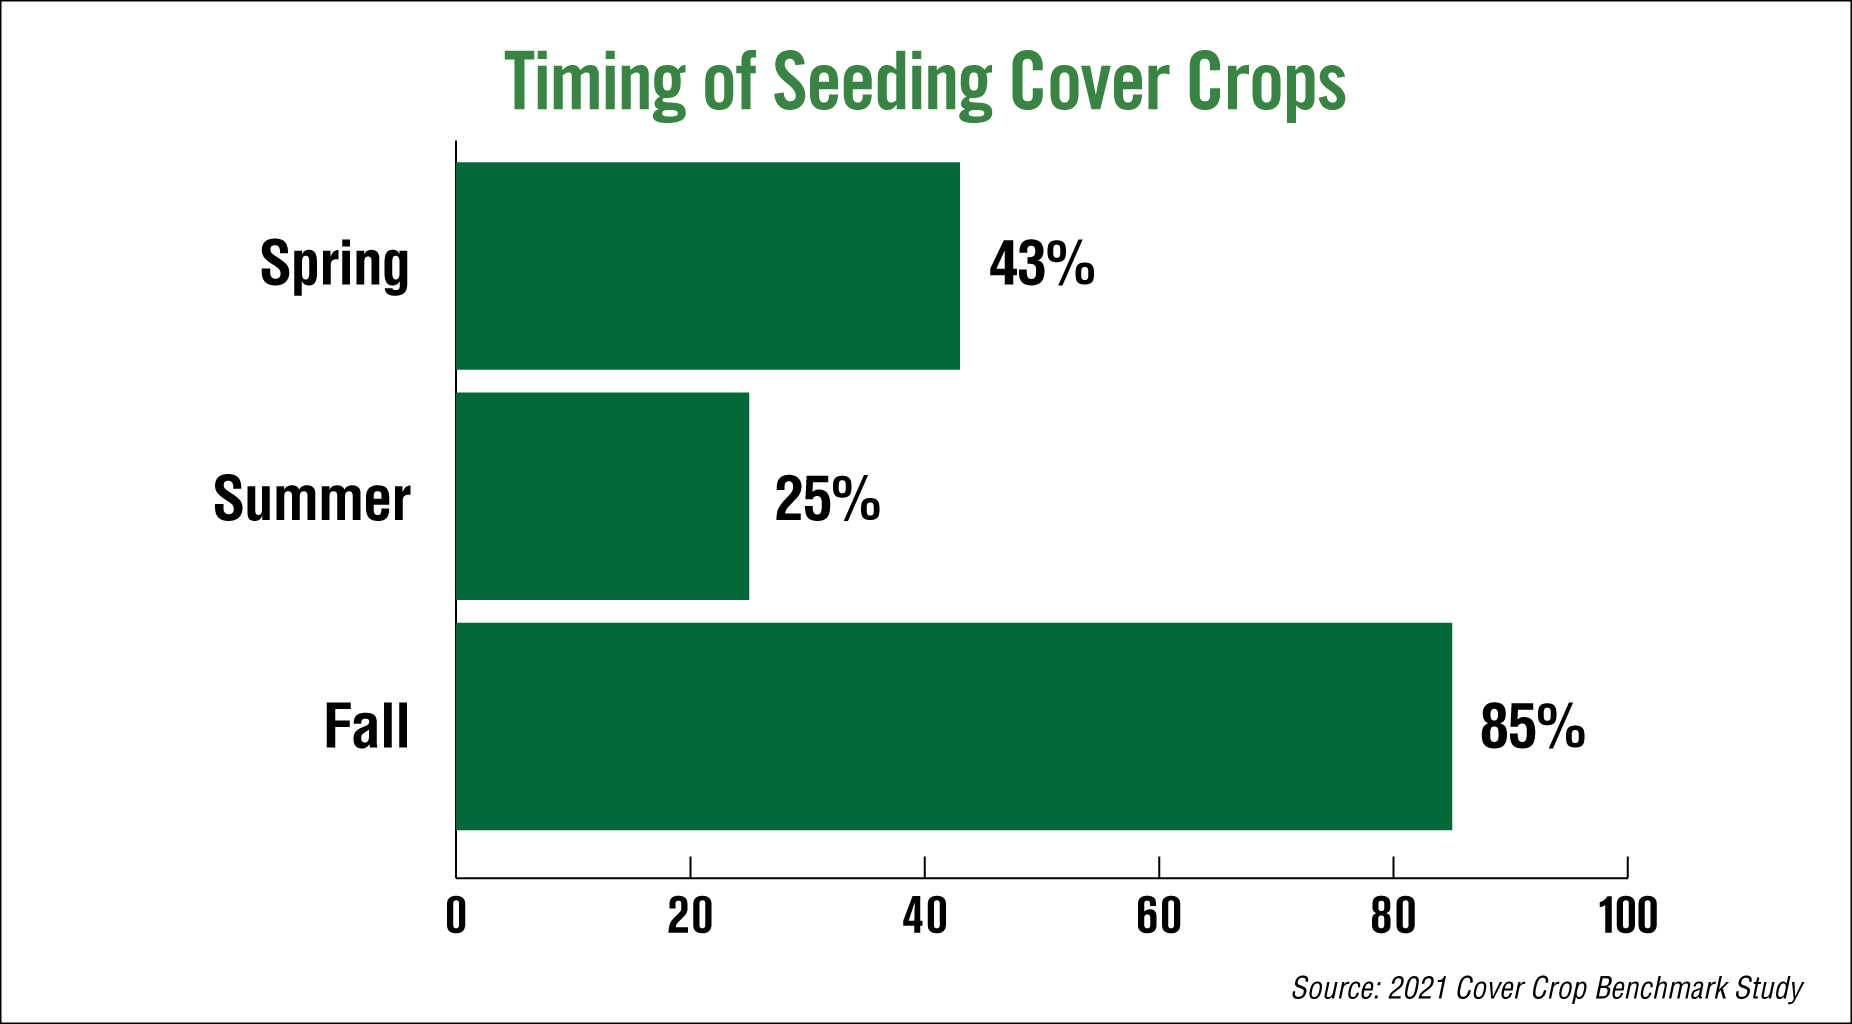 Timing of Seeding Cover Crops